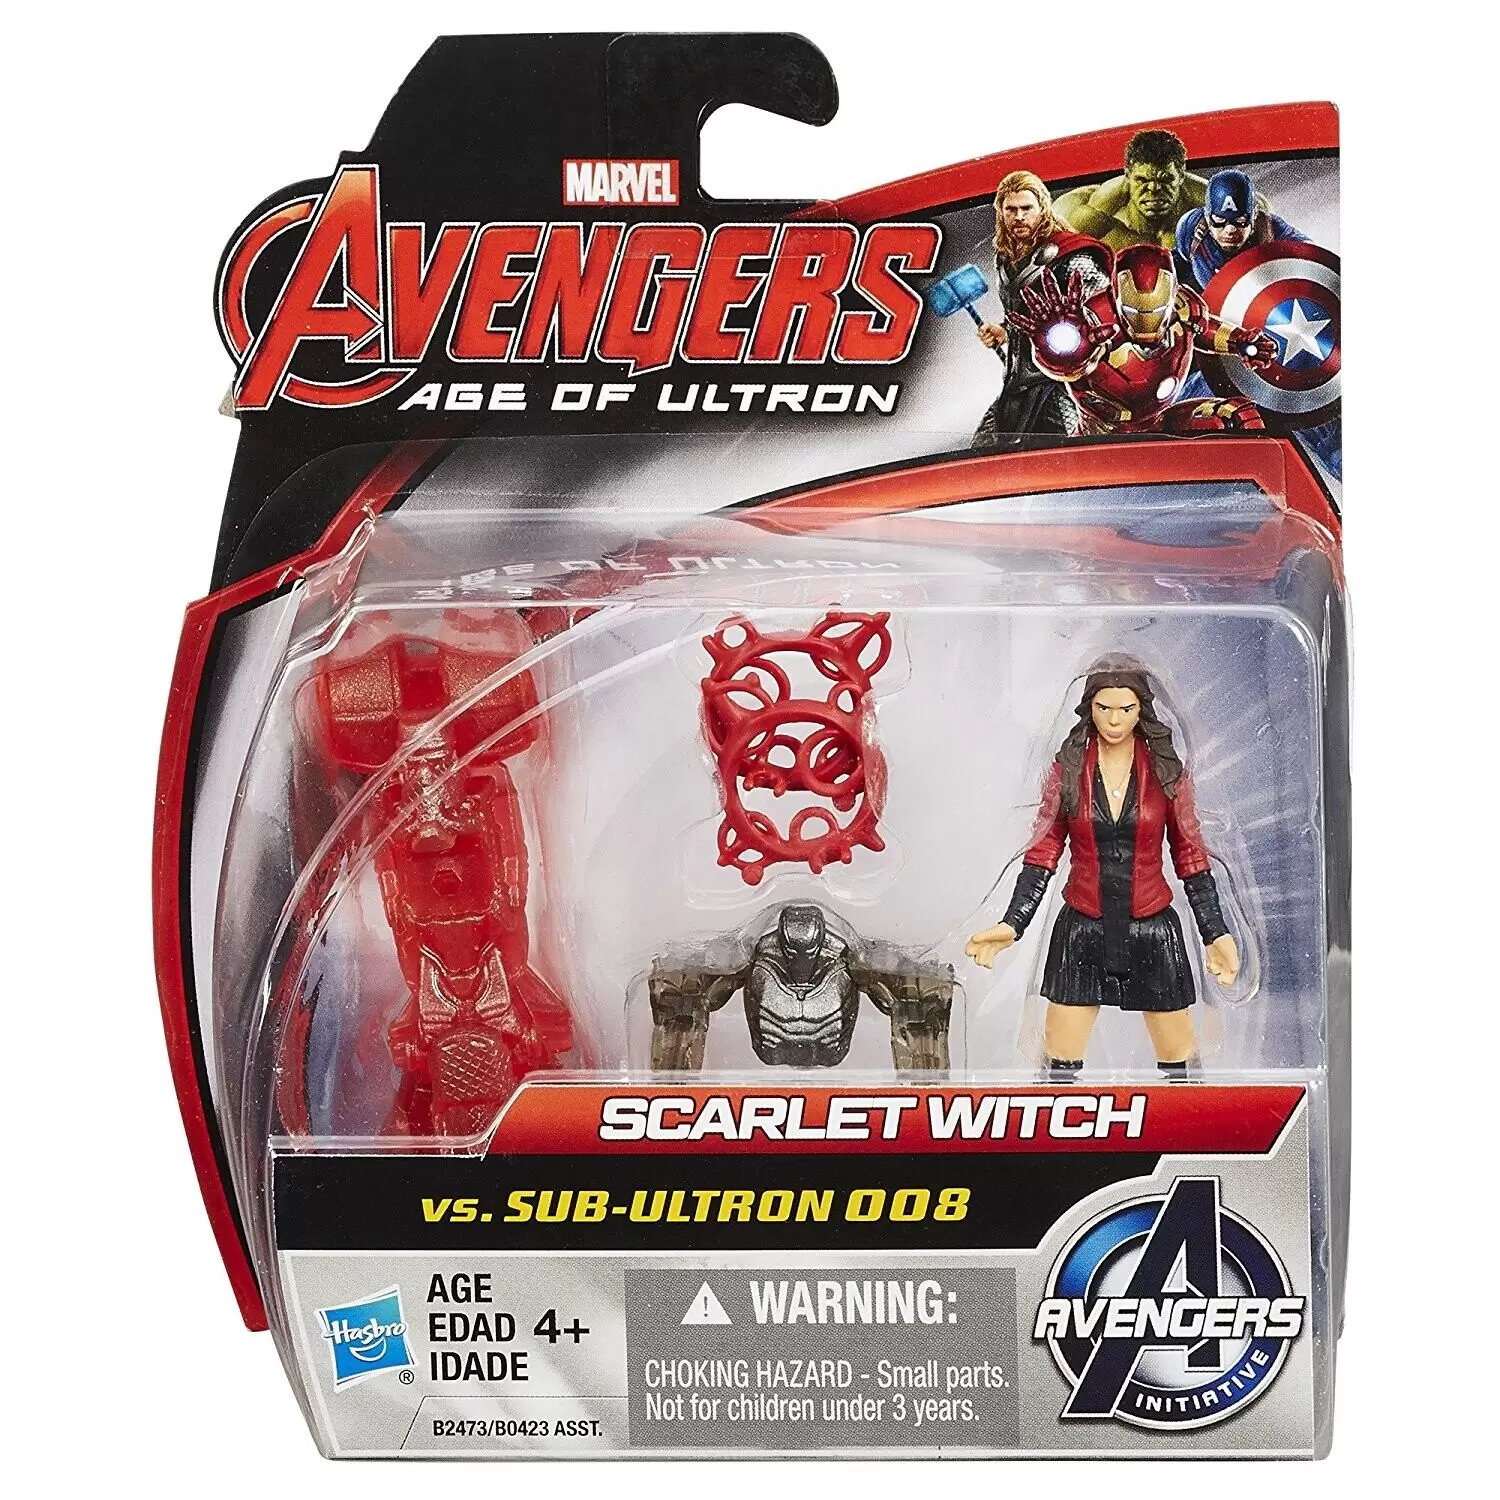 Avengers : Age of Ultron - Scarlet Witch vs Sub-Ultron 008